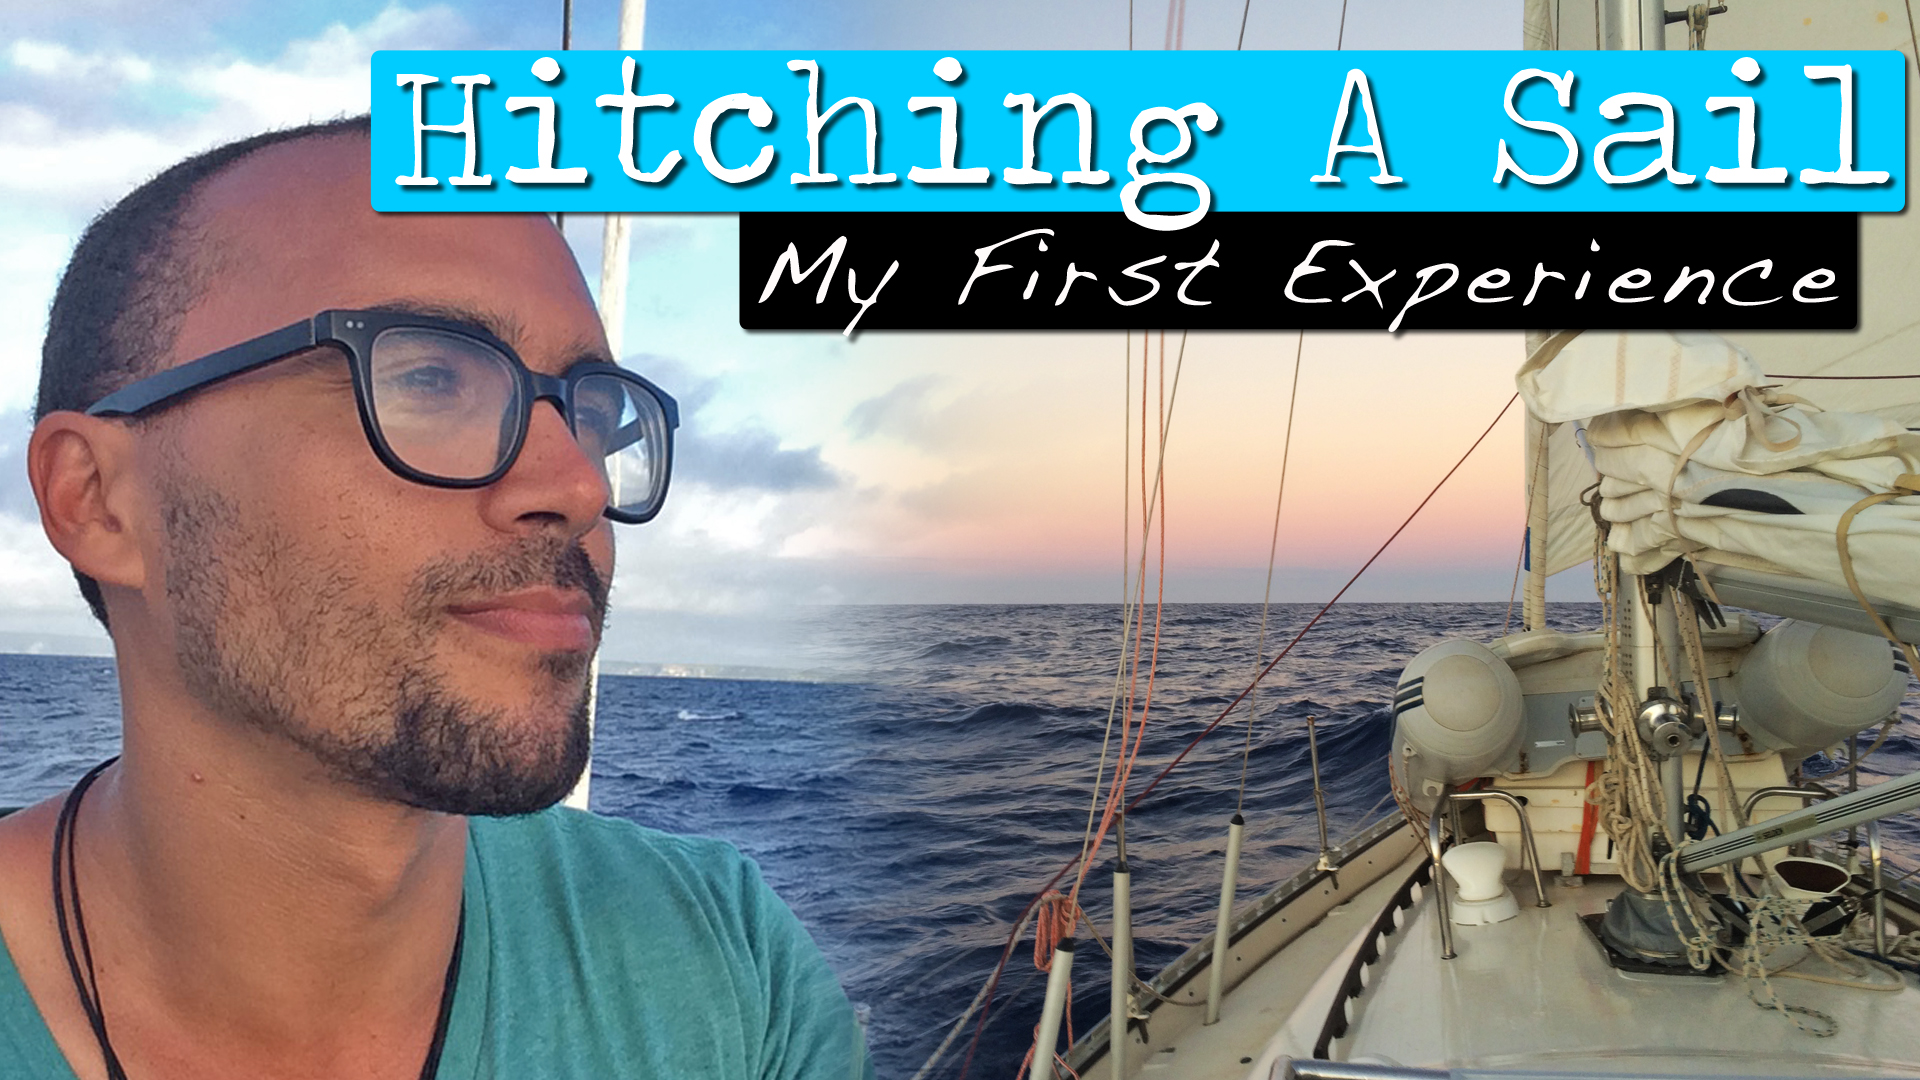 How to HITCH A SAIL | South Pacific Experiences